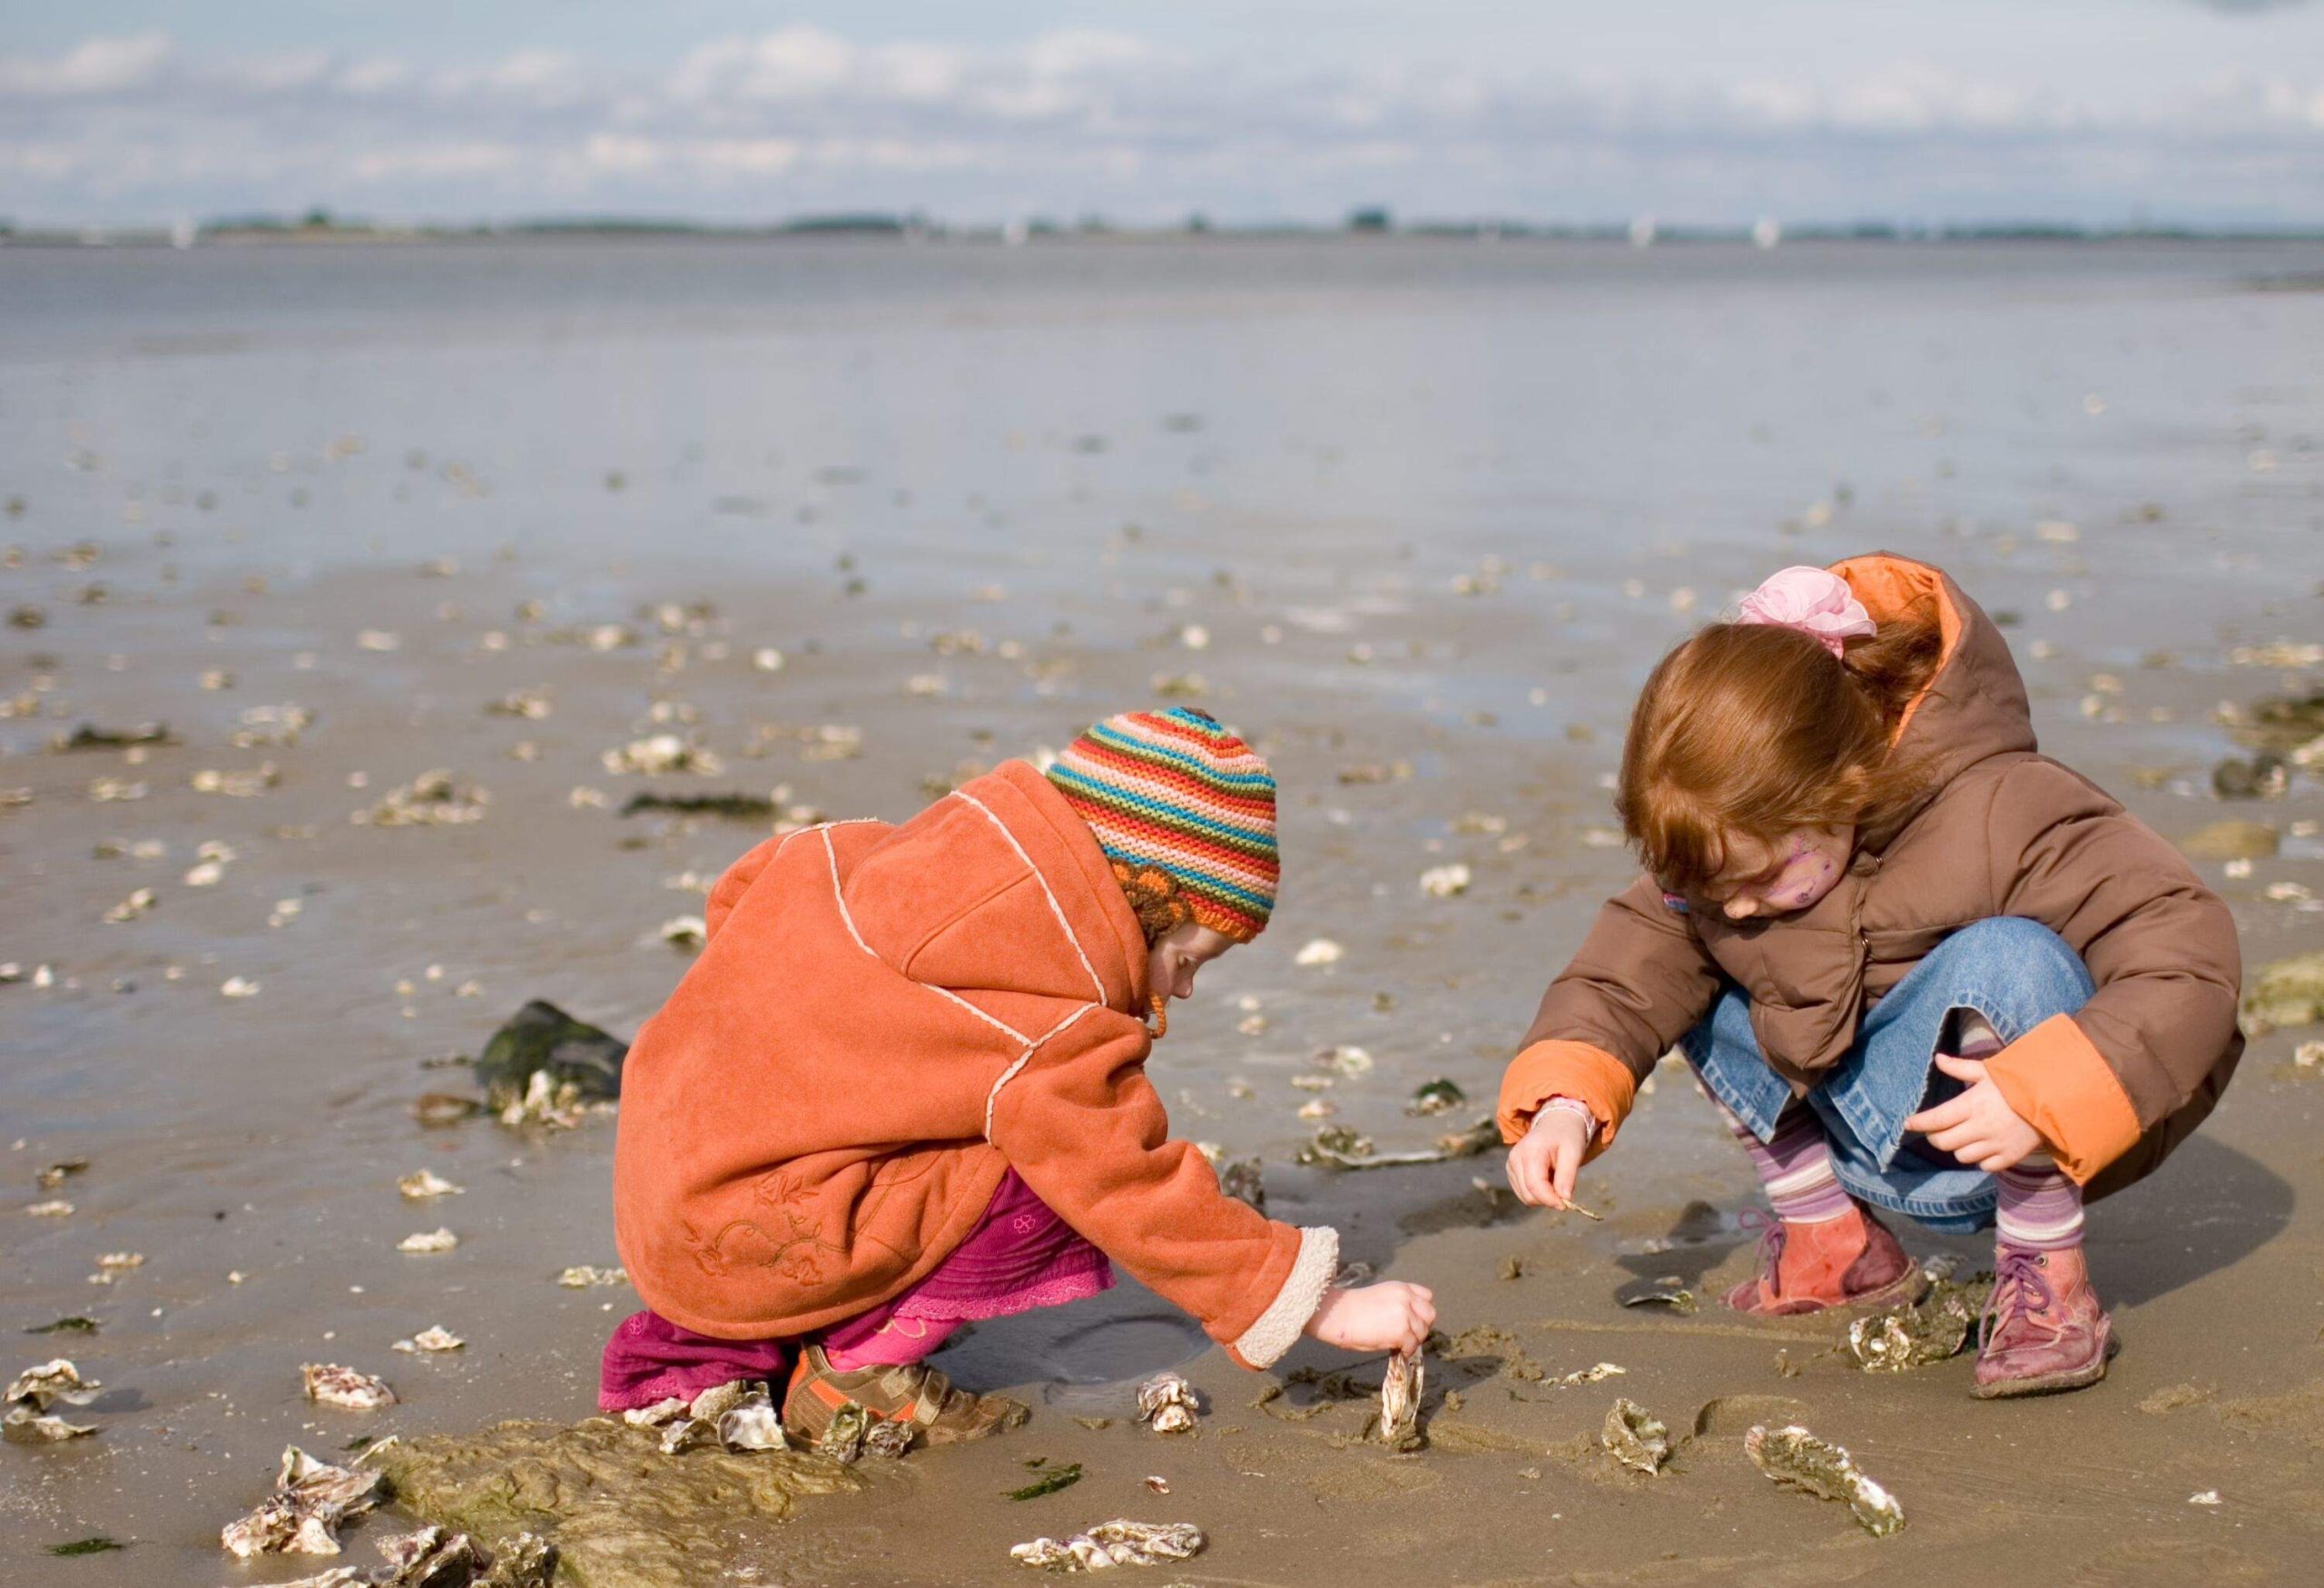 "Two girls, aged 3 and 5, searching oysters at the shore of the North Sea.Location: North-sea, Belgium"